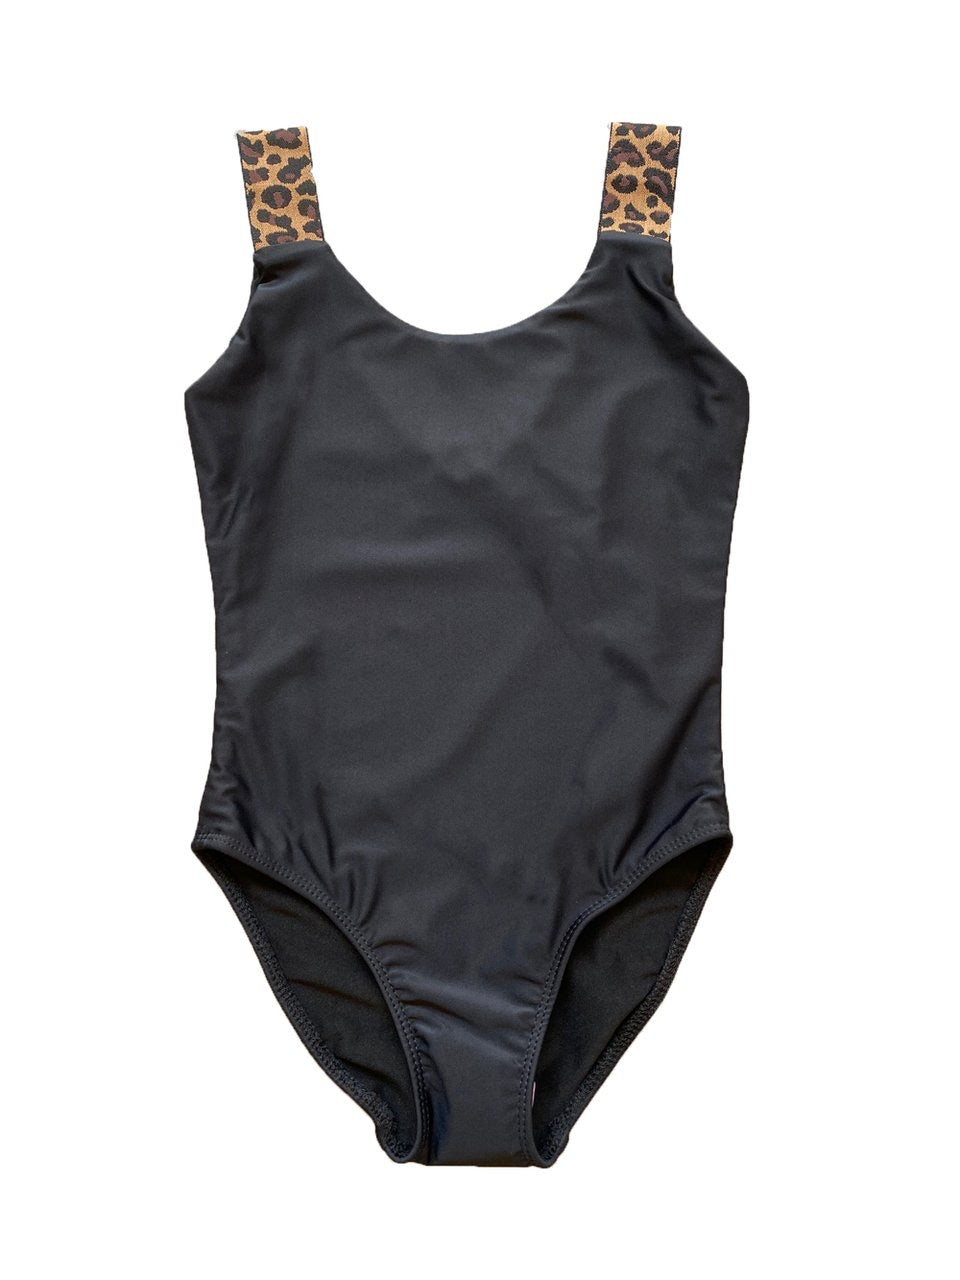 Cheryl Kids One Piece Bathing Suit with Leopard Straps